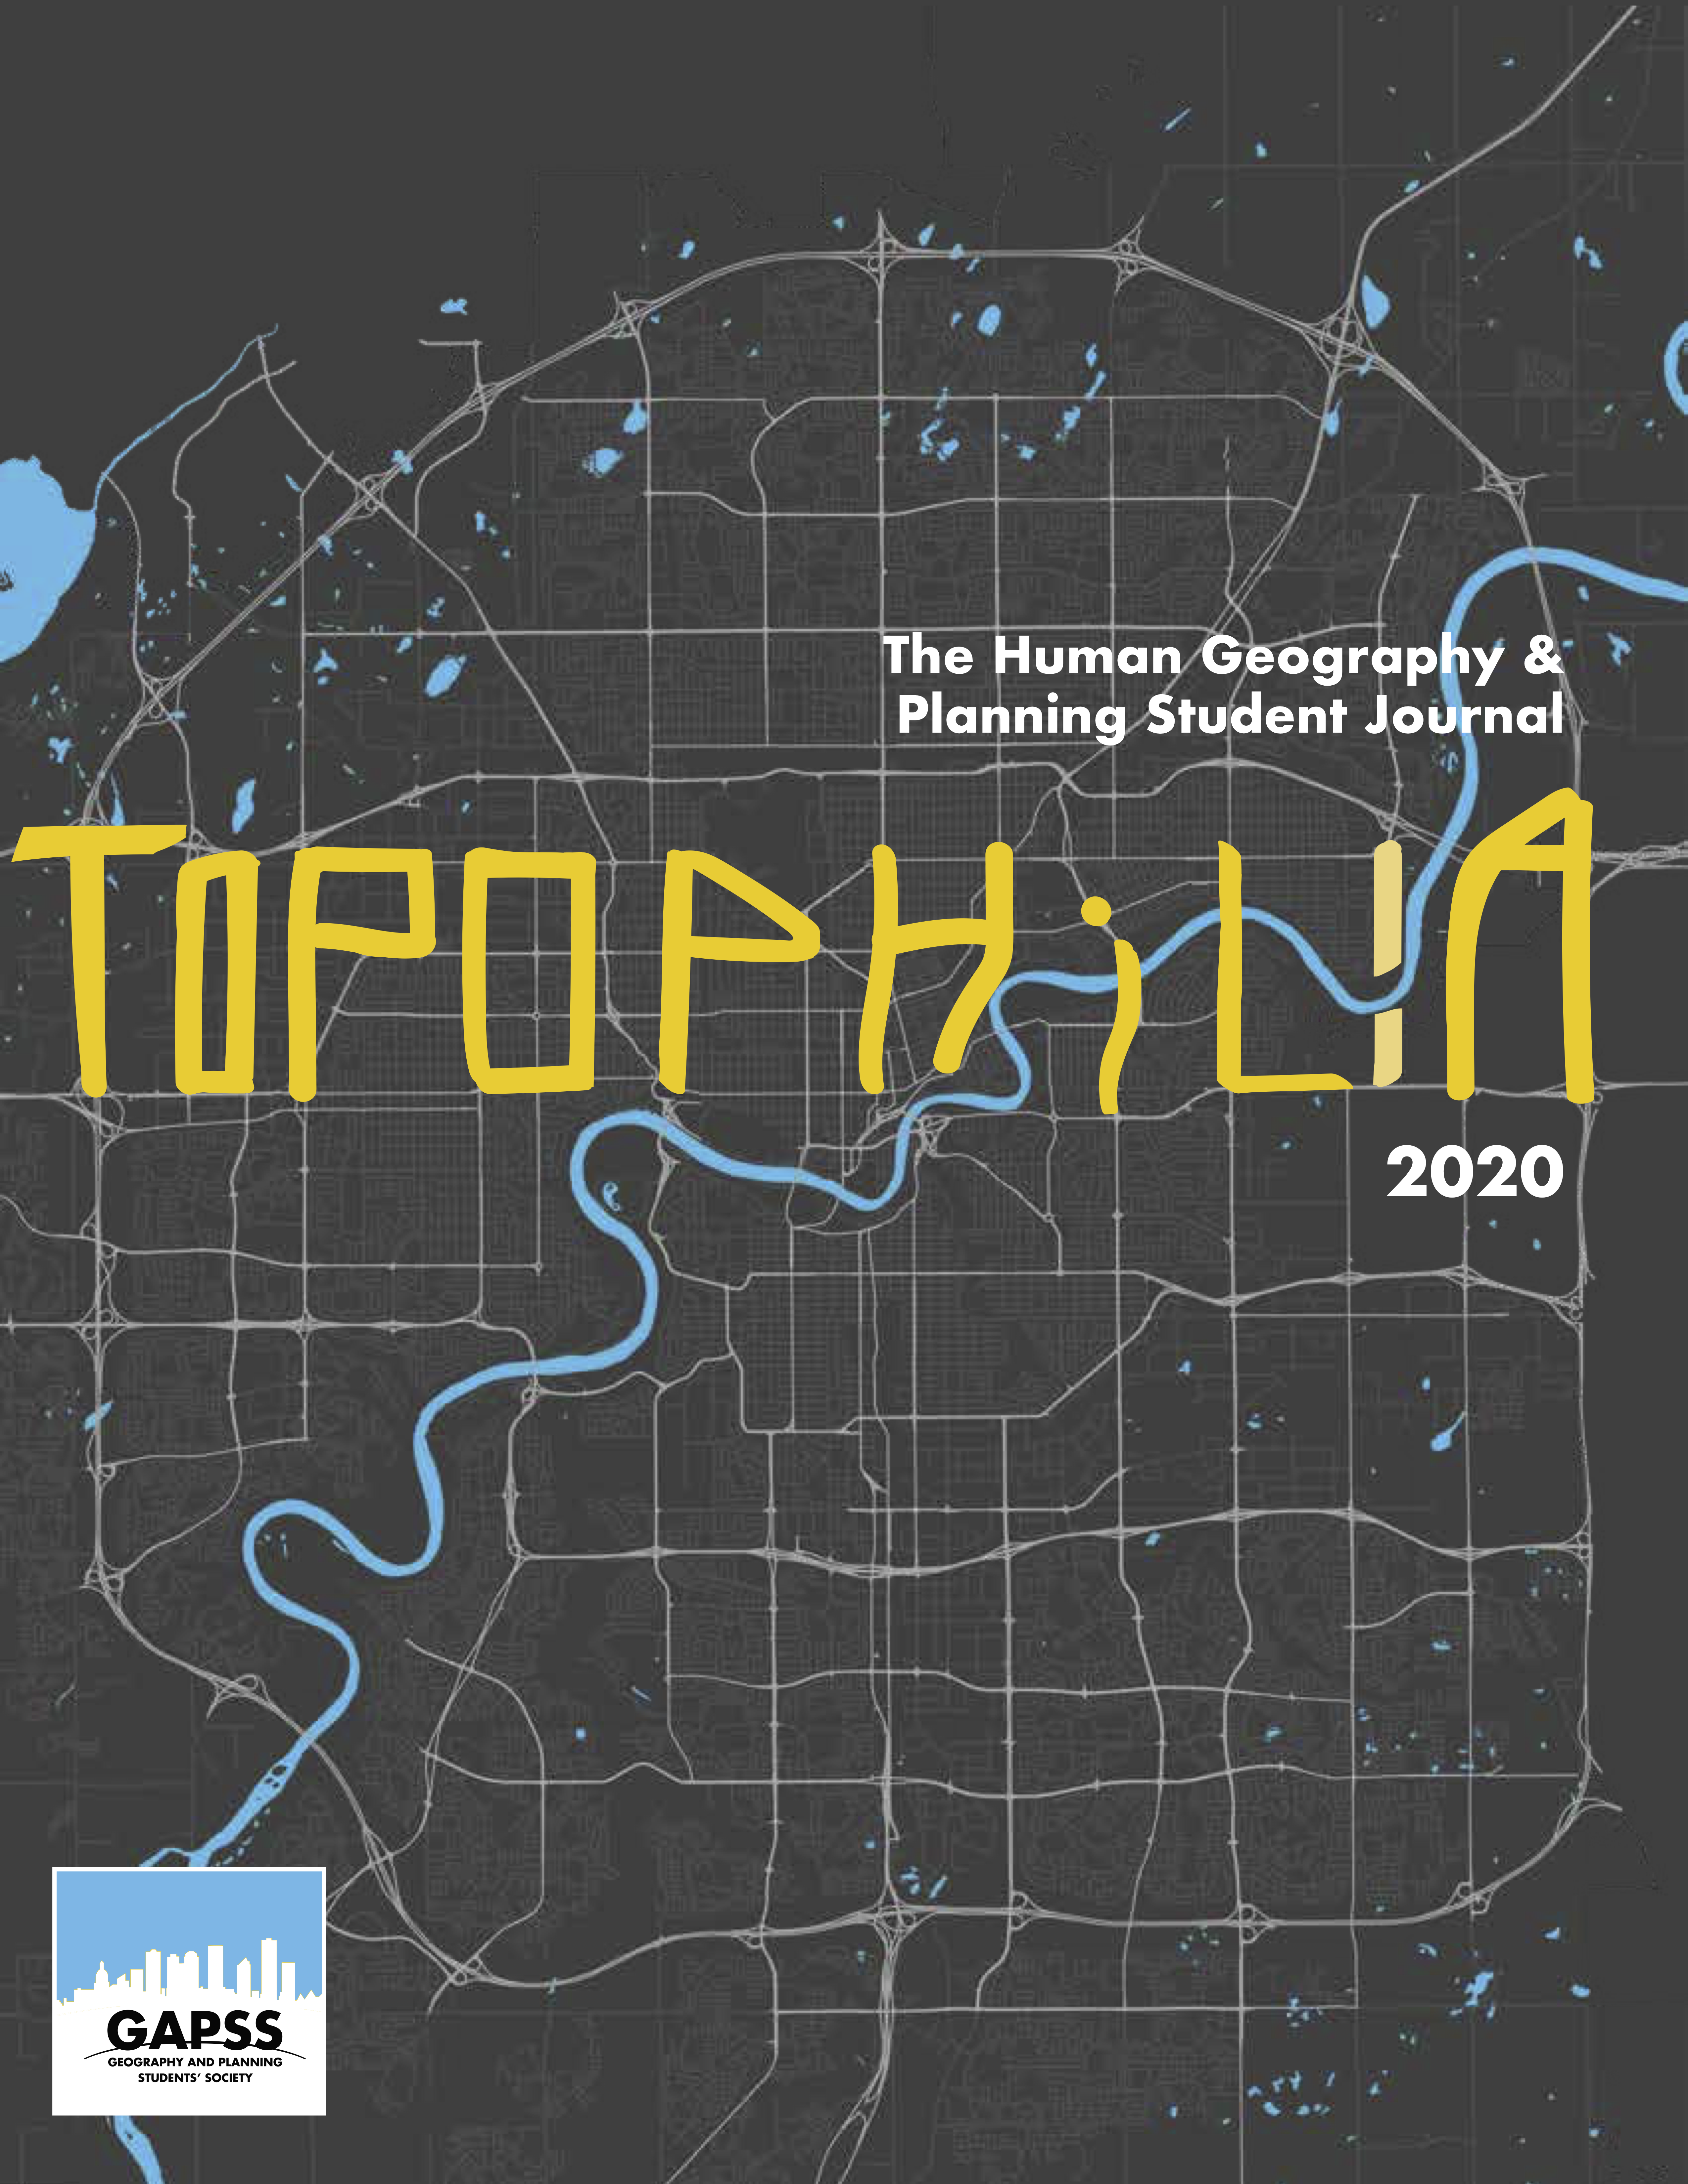 Cover Page: The following title is set on a map of Roads in Edmonton, Alberta: The Human Geography and Planning Student Journal; Topophilia 2020